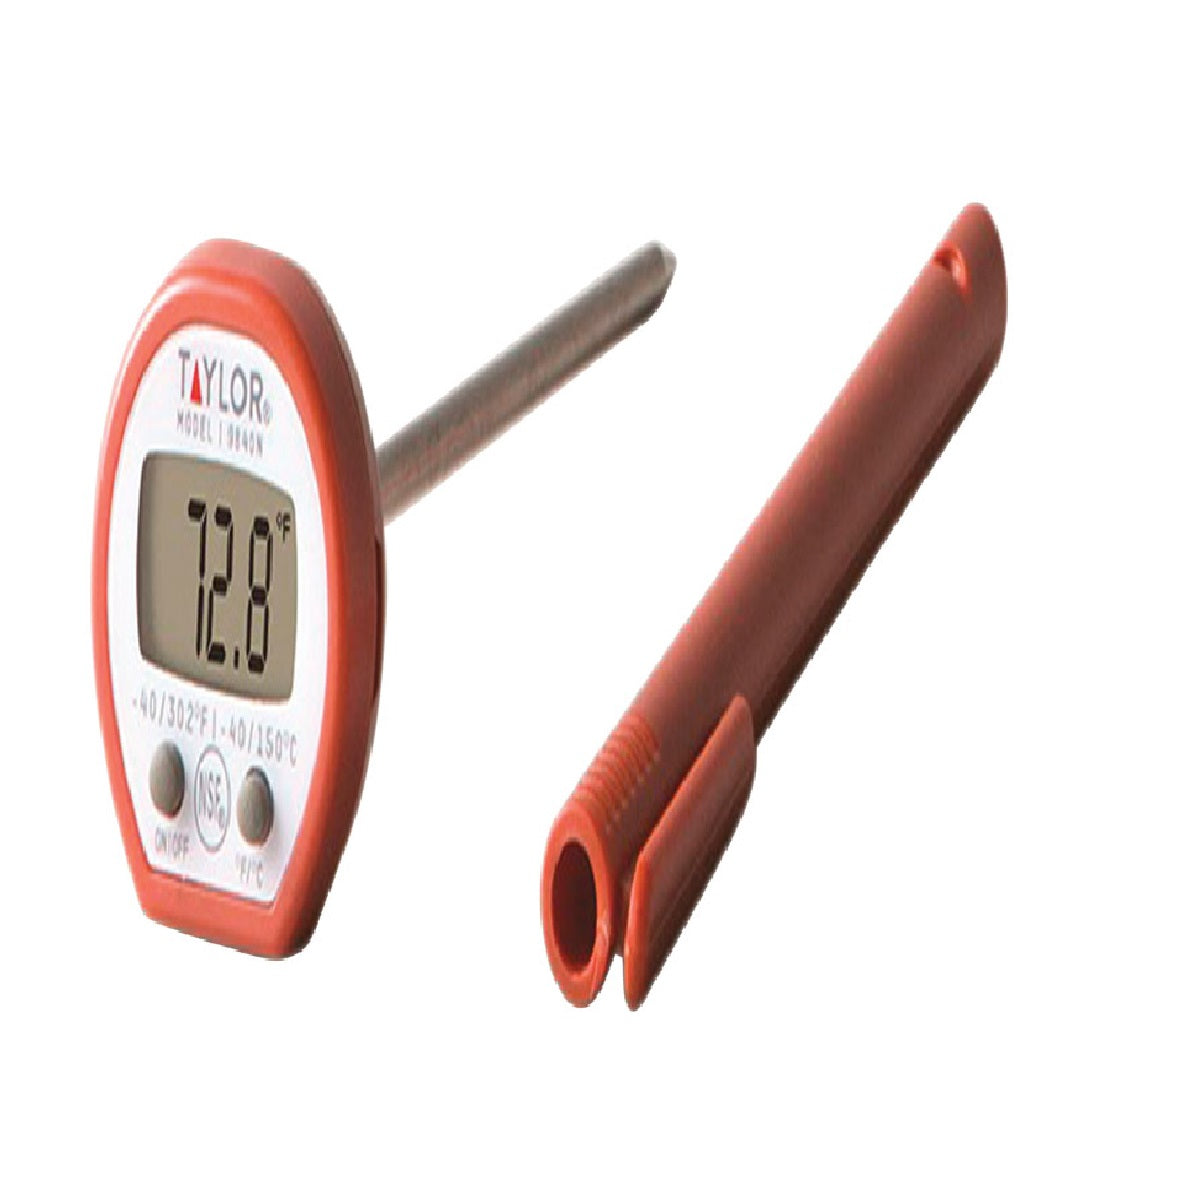 Taylor 9840N Instant Read Digital Pocket Thermometer